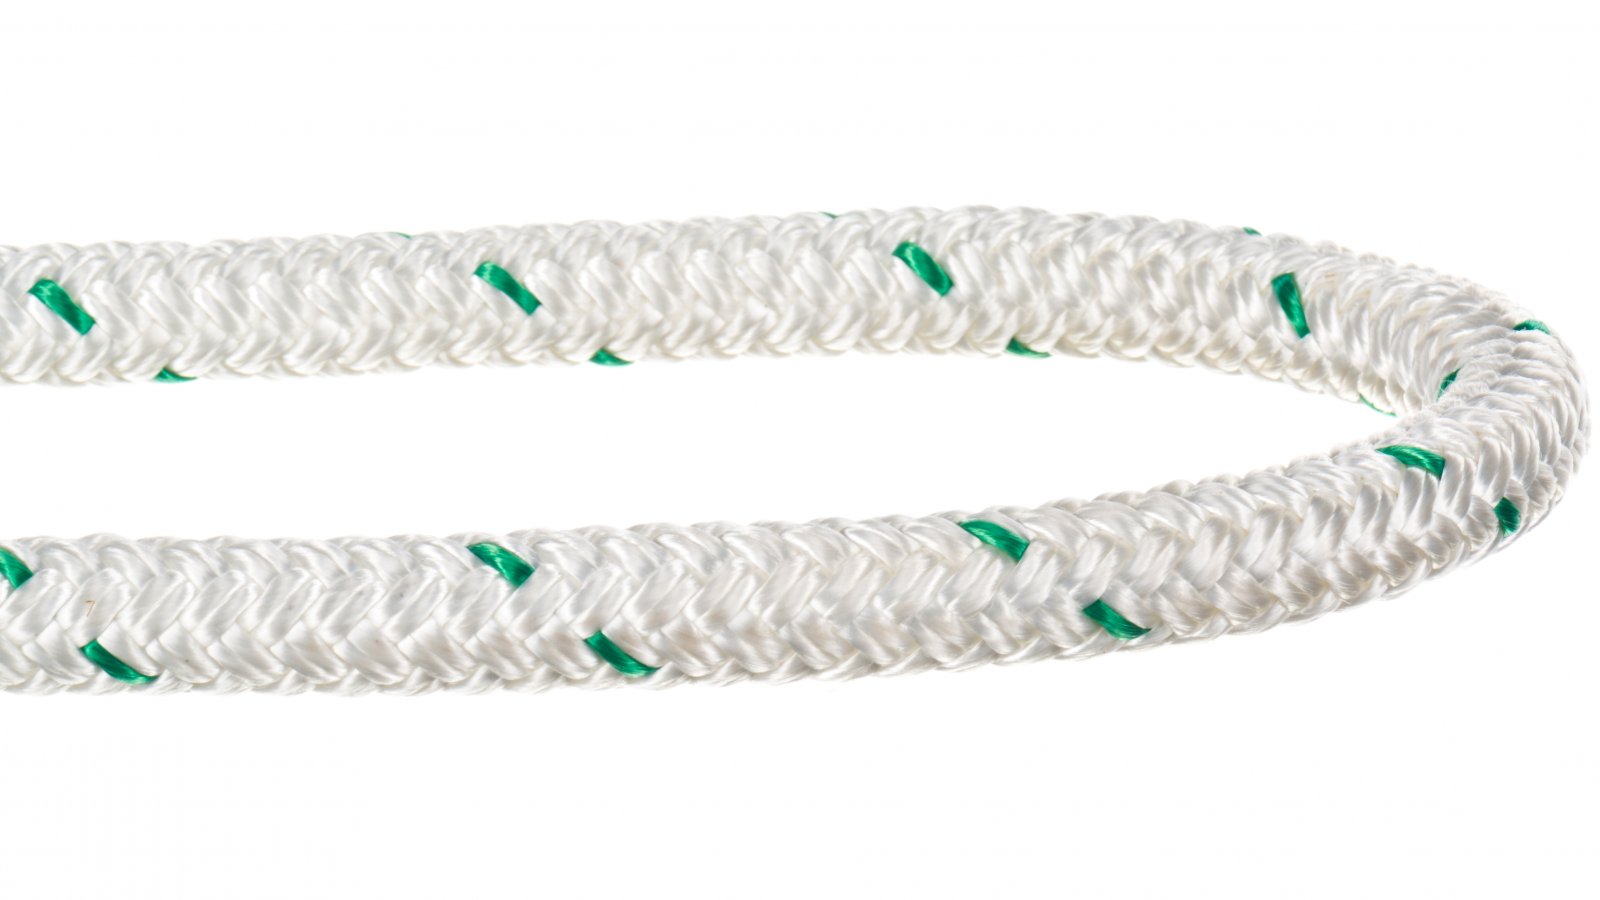 Polyester Nylon Double Braid ropes - Lowest prices, free shipping